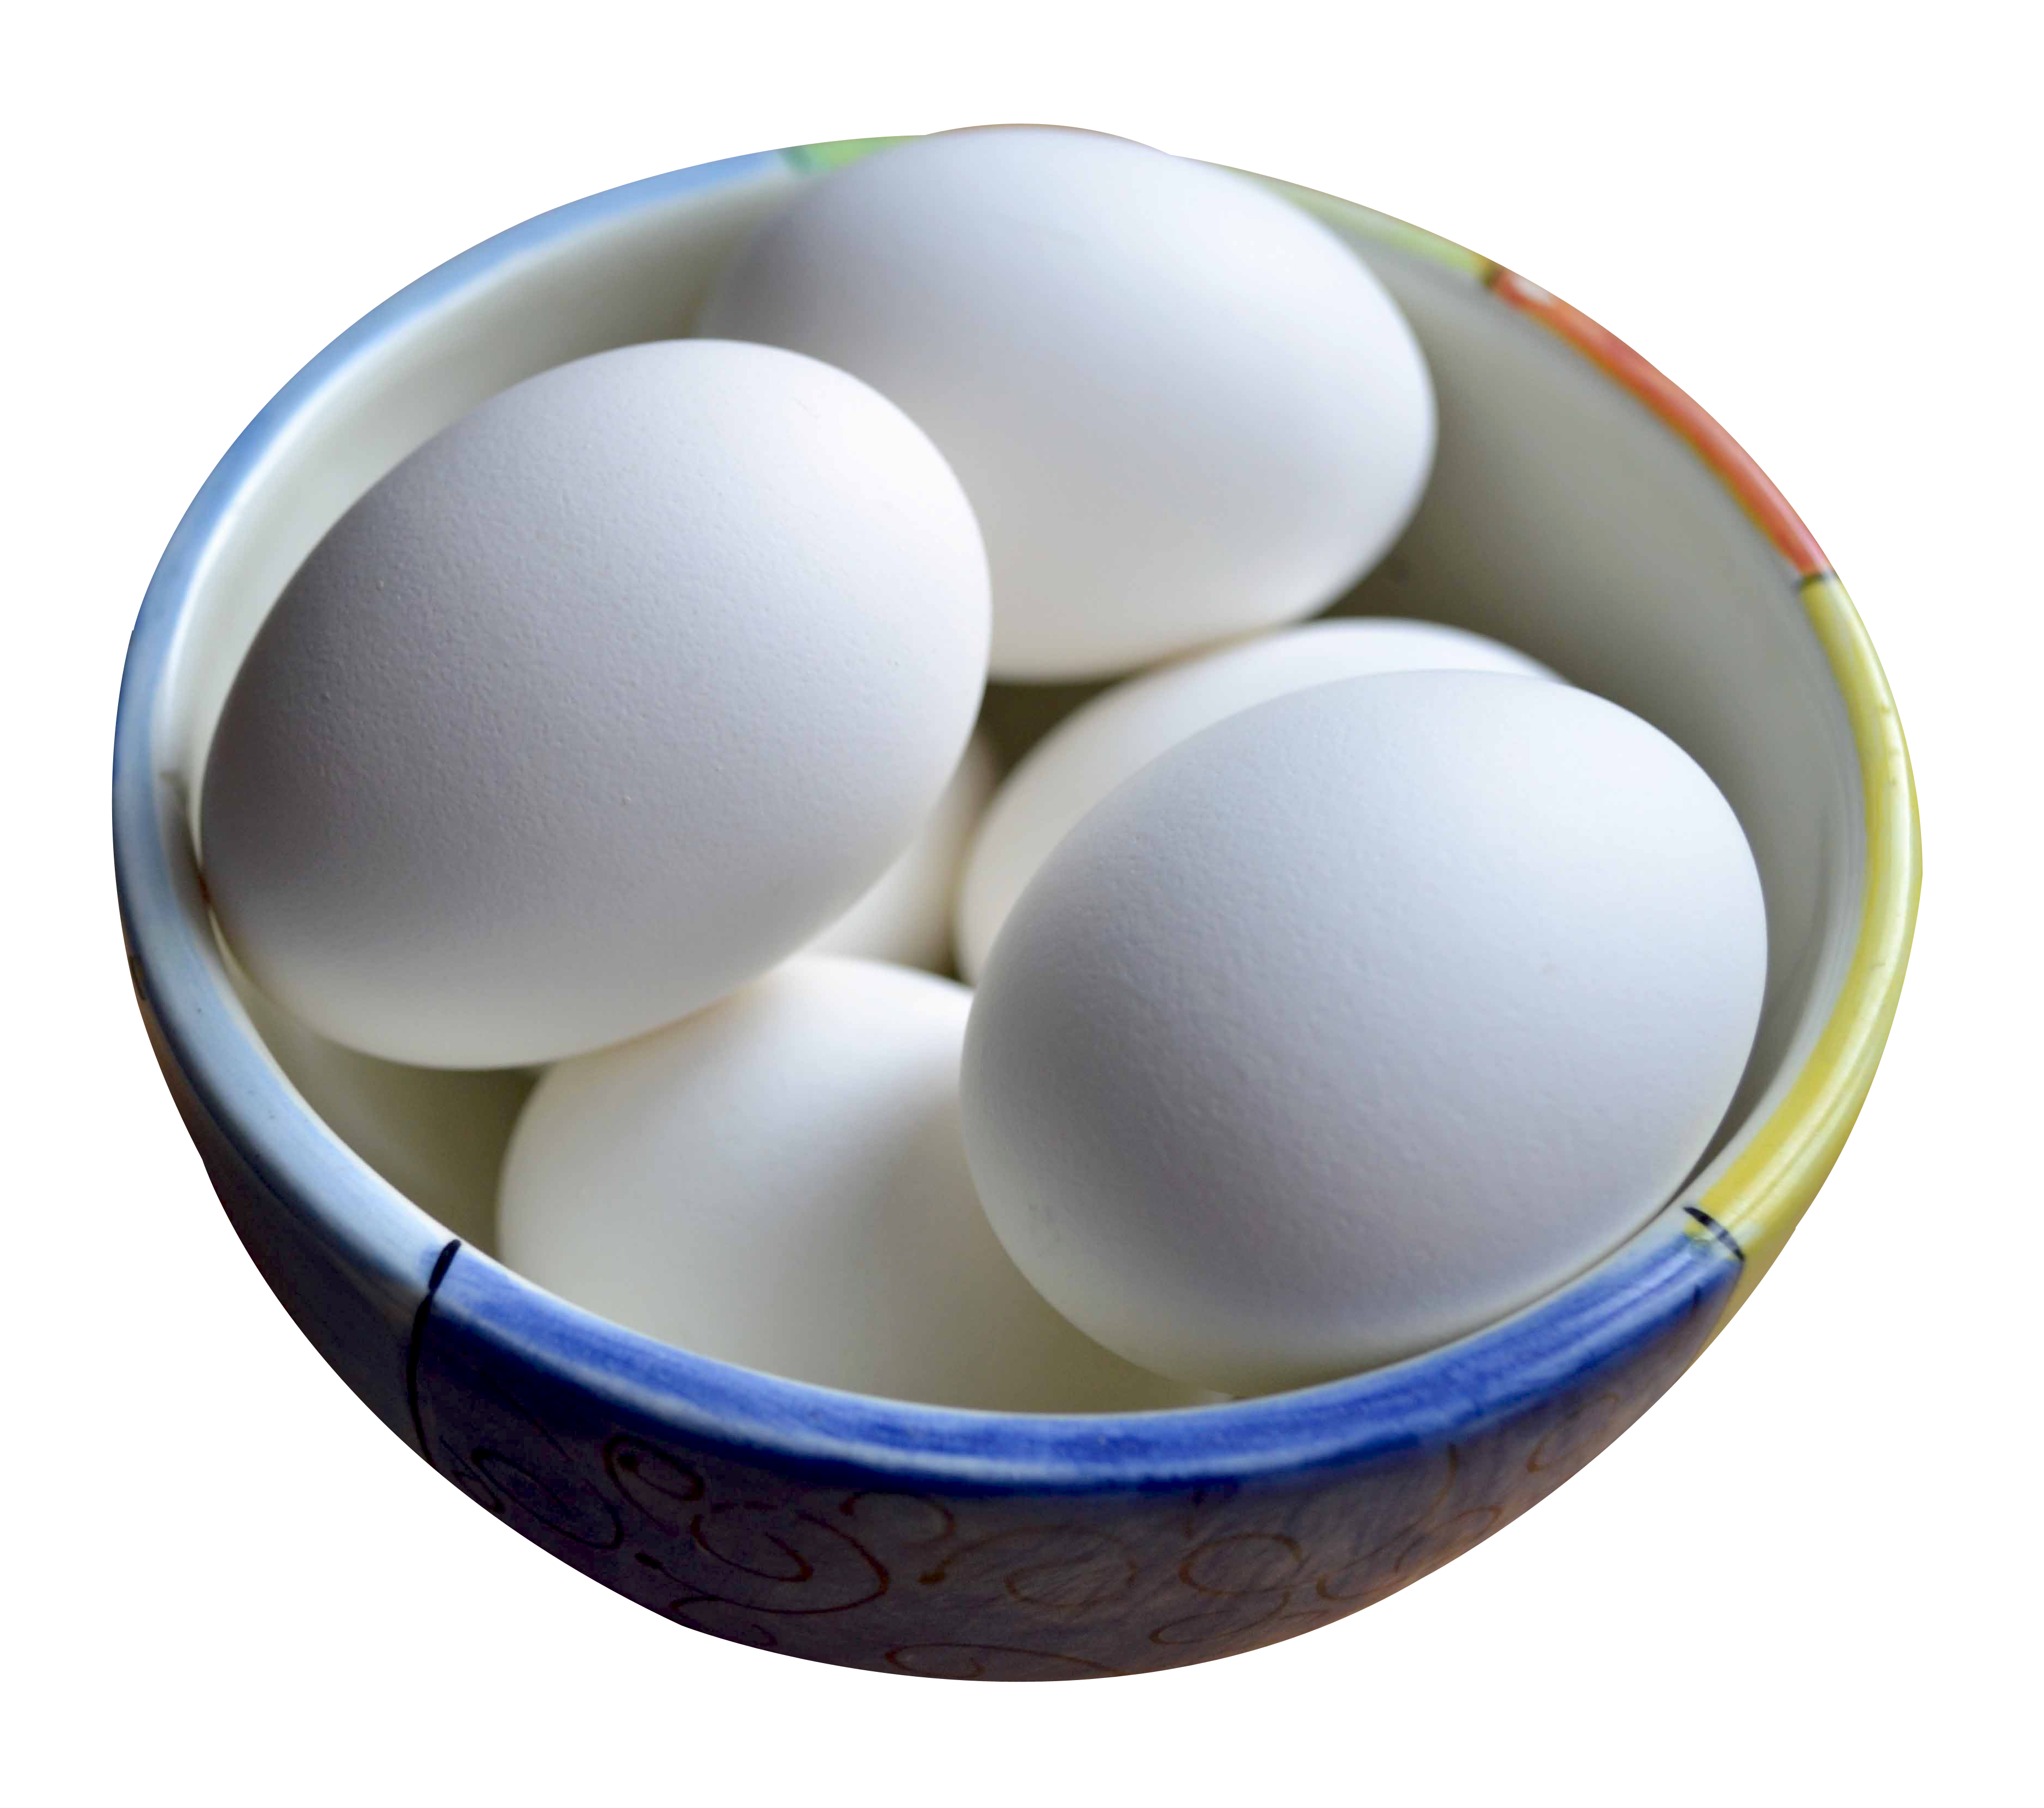 Egg Png Image For Free Download